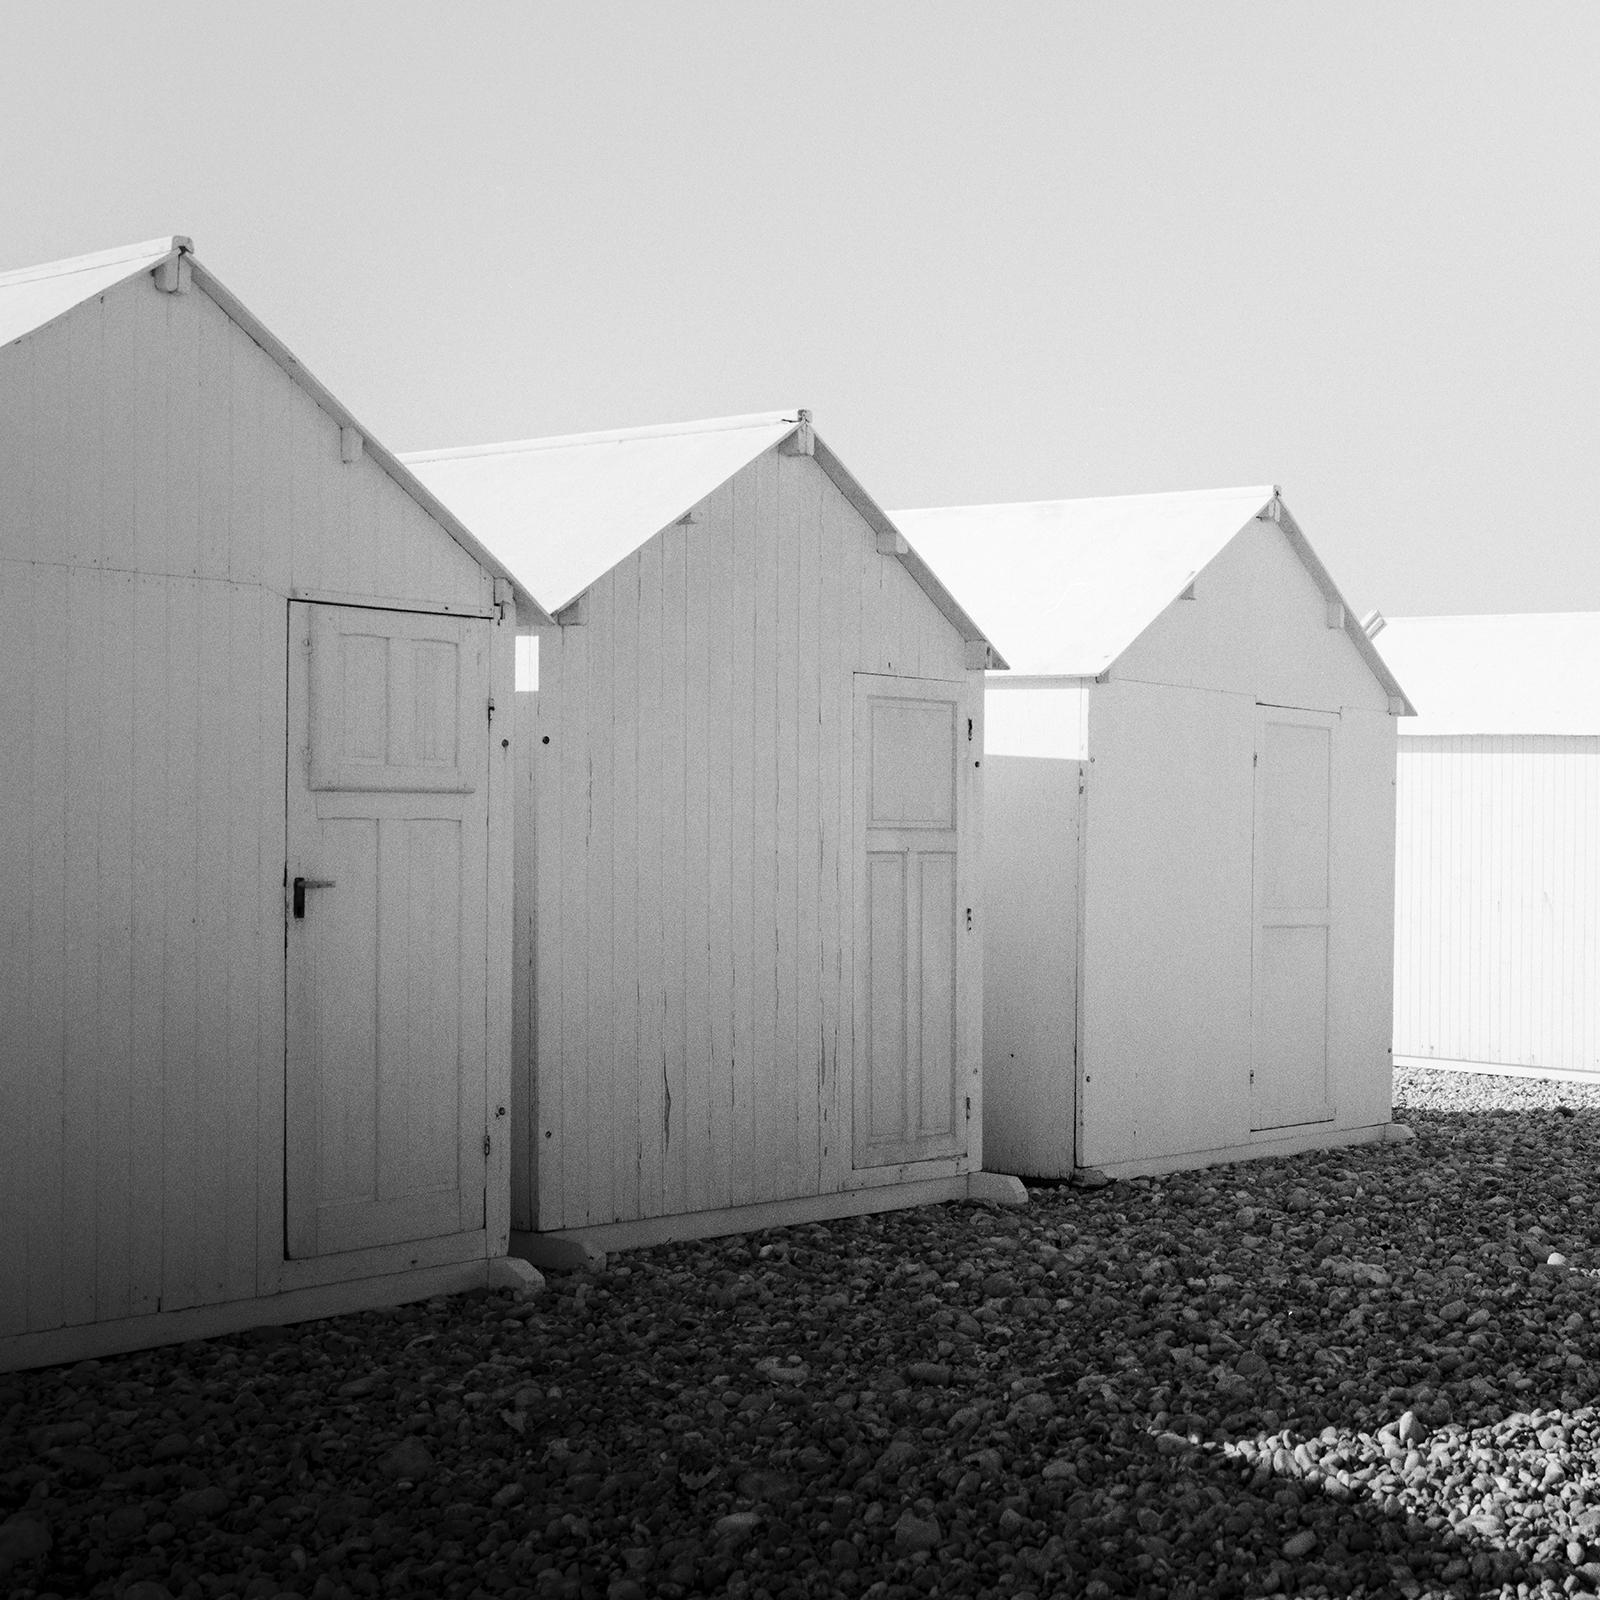 Row of Beach Huts, rocky beach, black and white, fine art, landscape photography For Sale 3